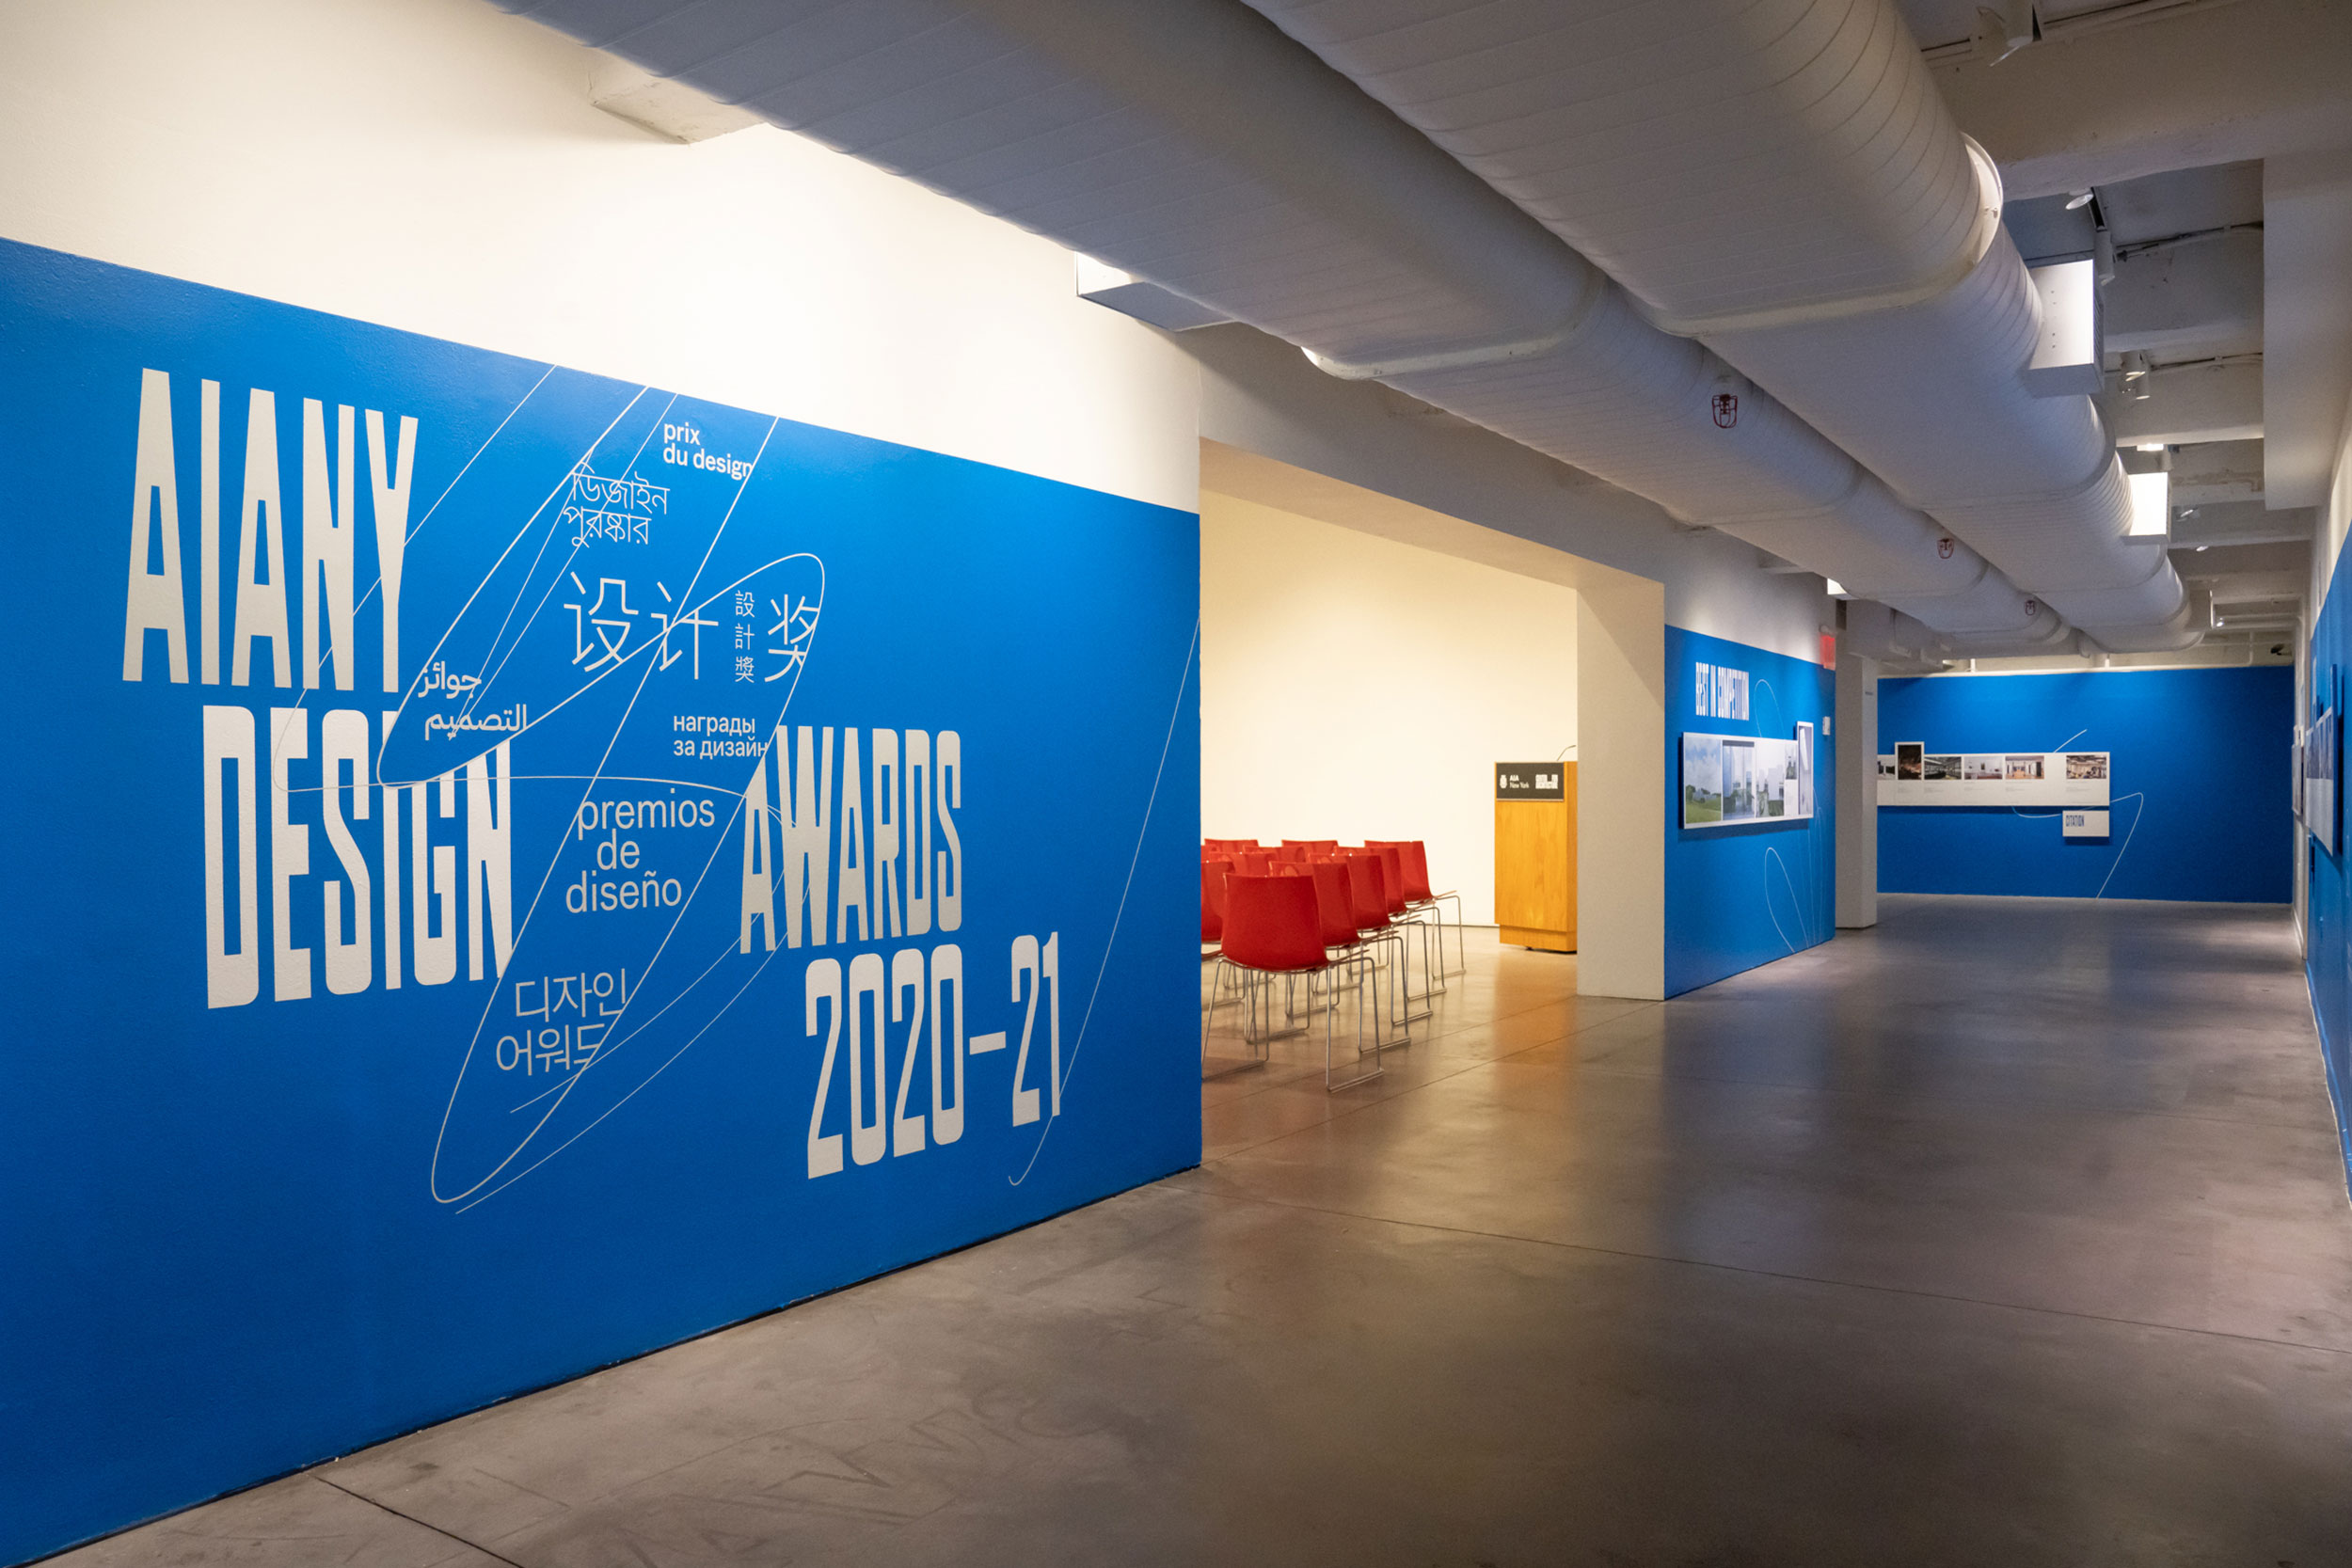 Installation view, AIANY Design Awards 2020-21, Center for Architecture. Photo: Asya Gorovits.